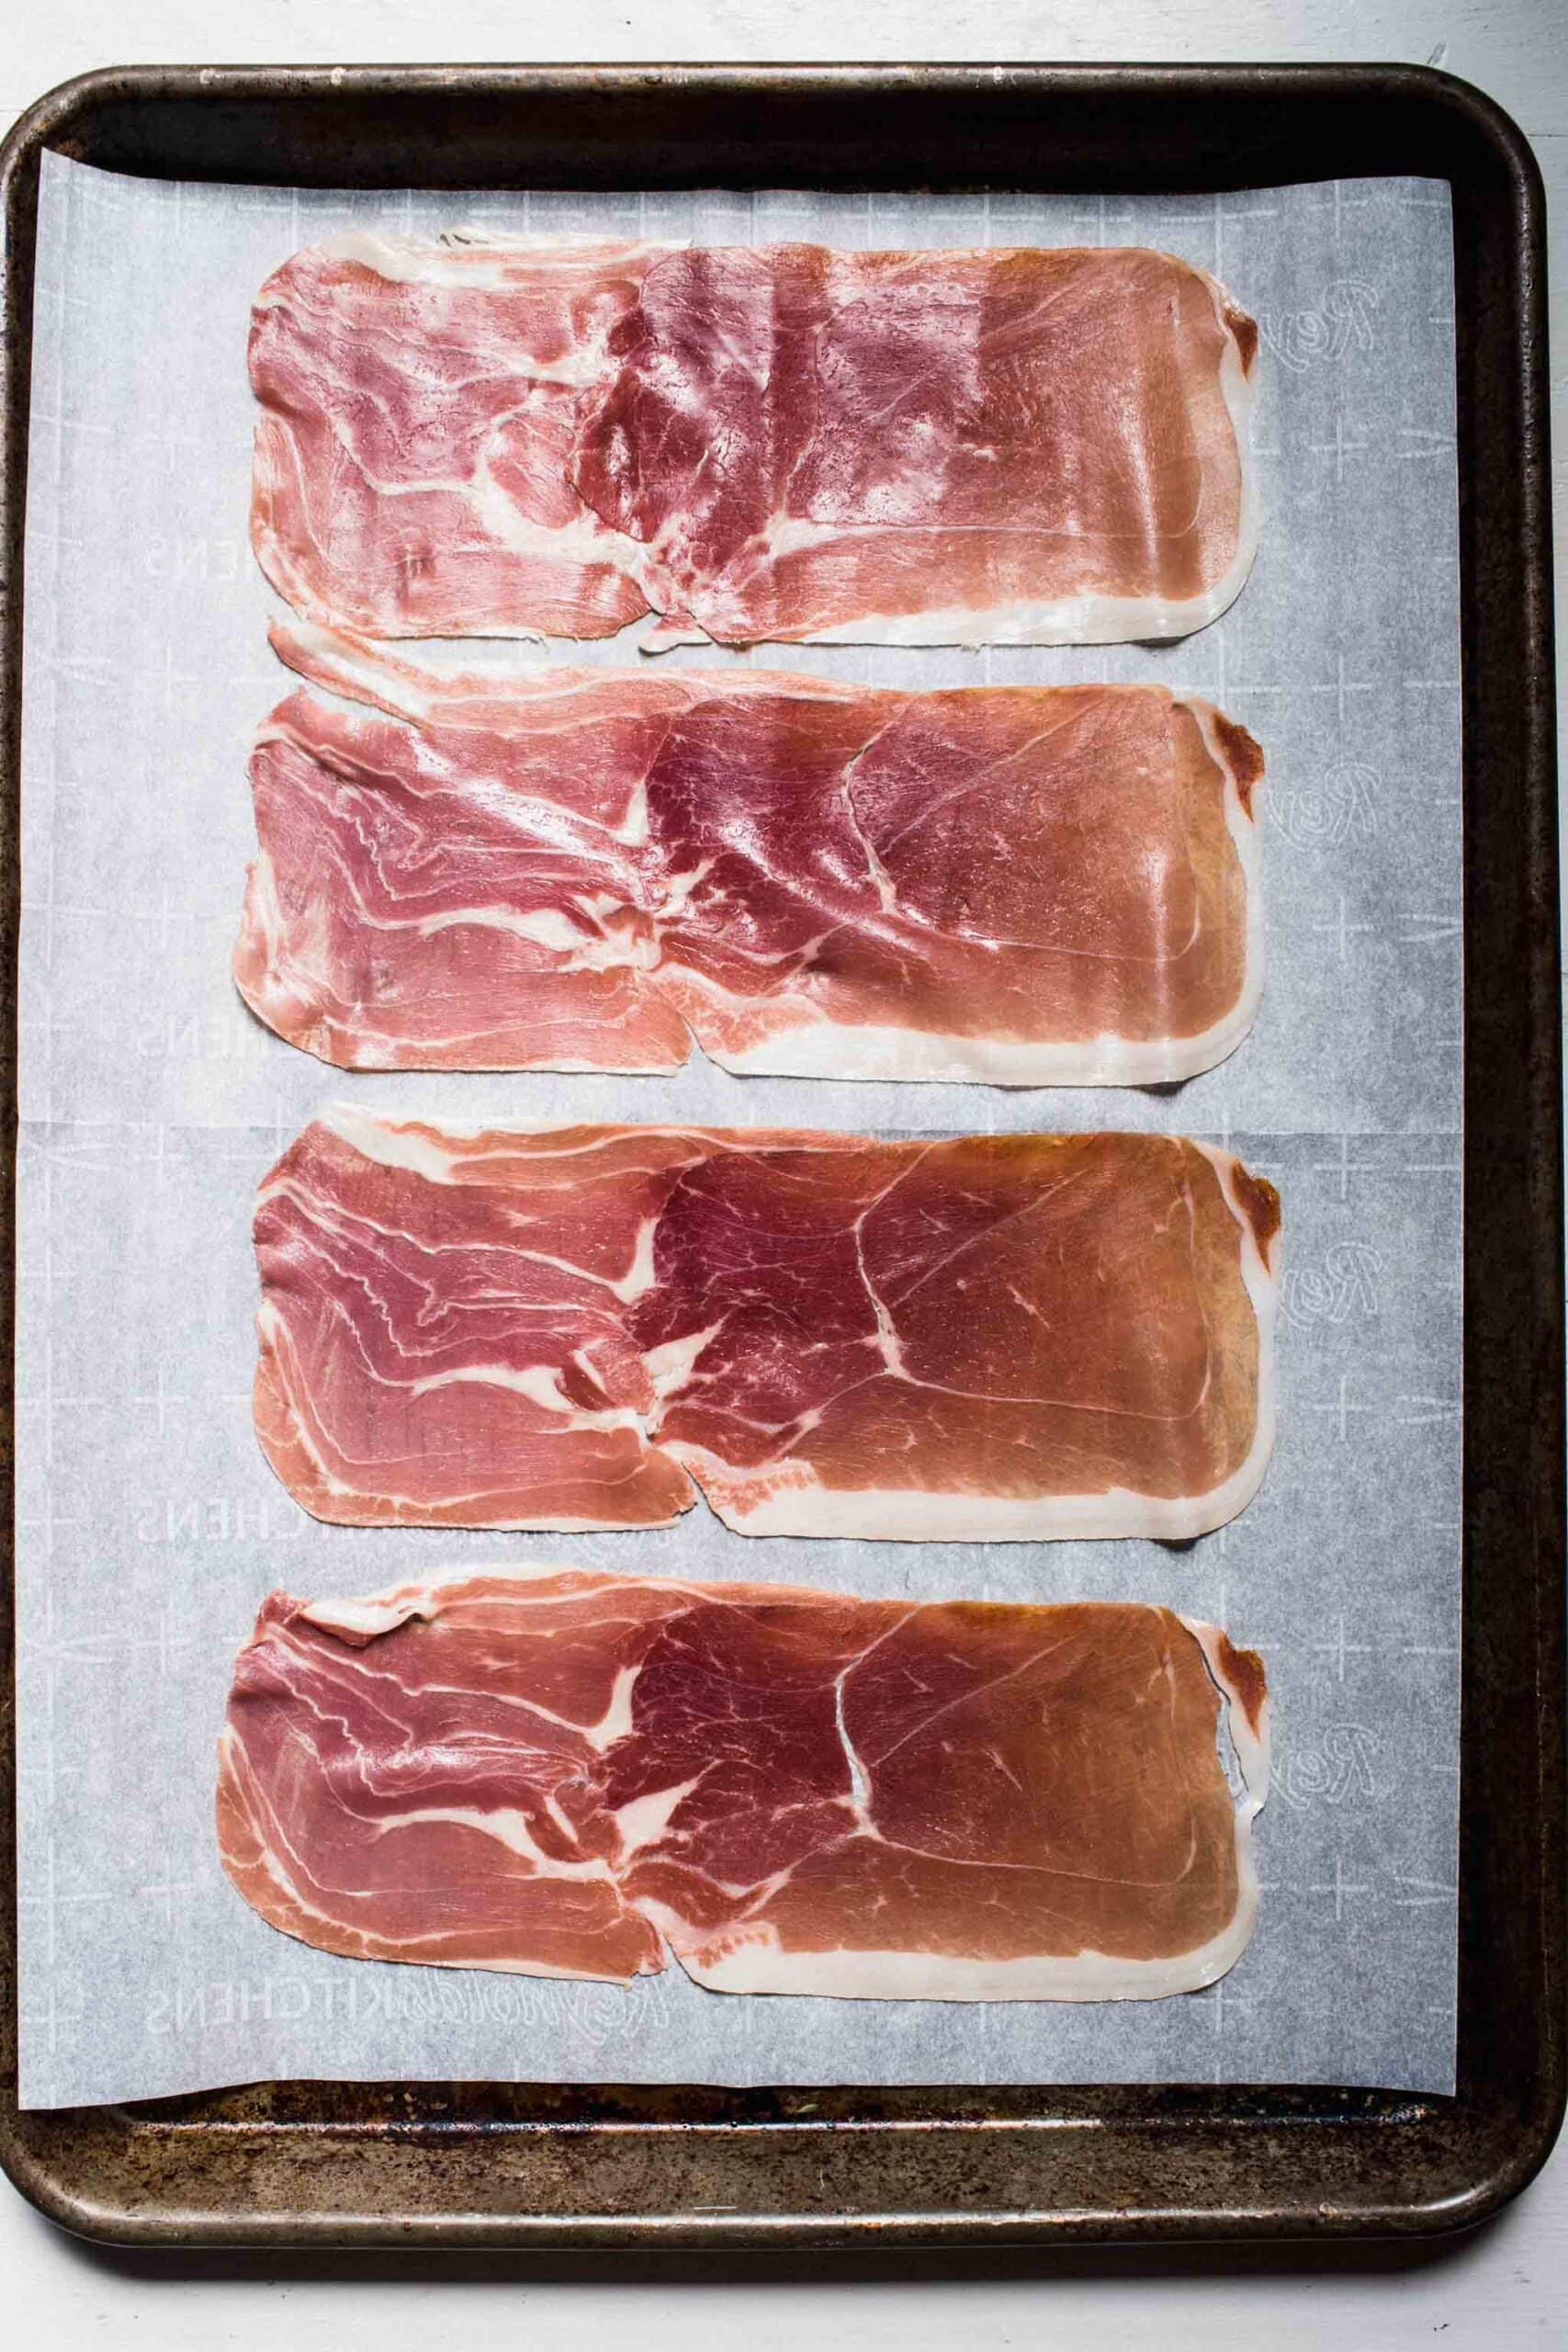 Uncooked prosciutto slices on baking sheet. 